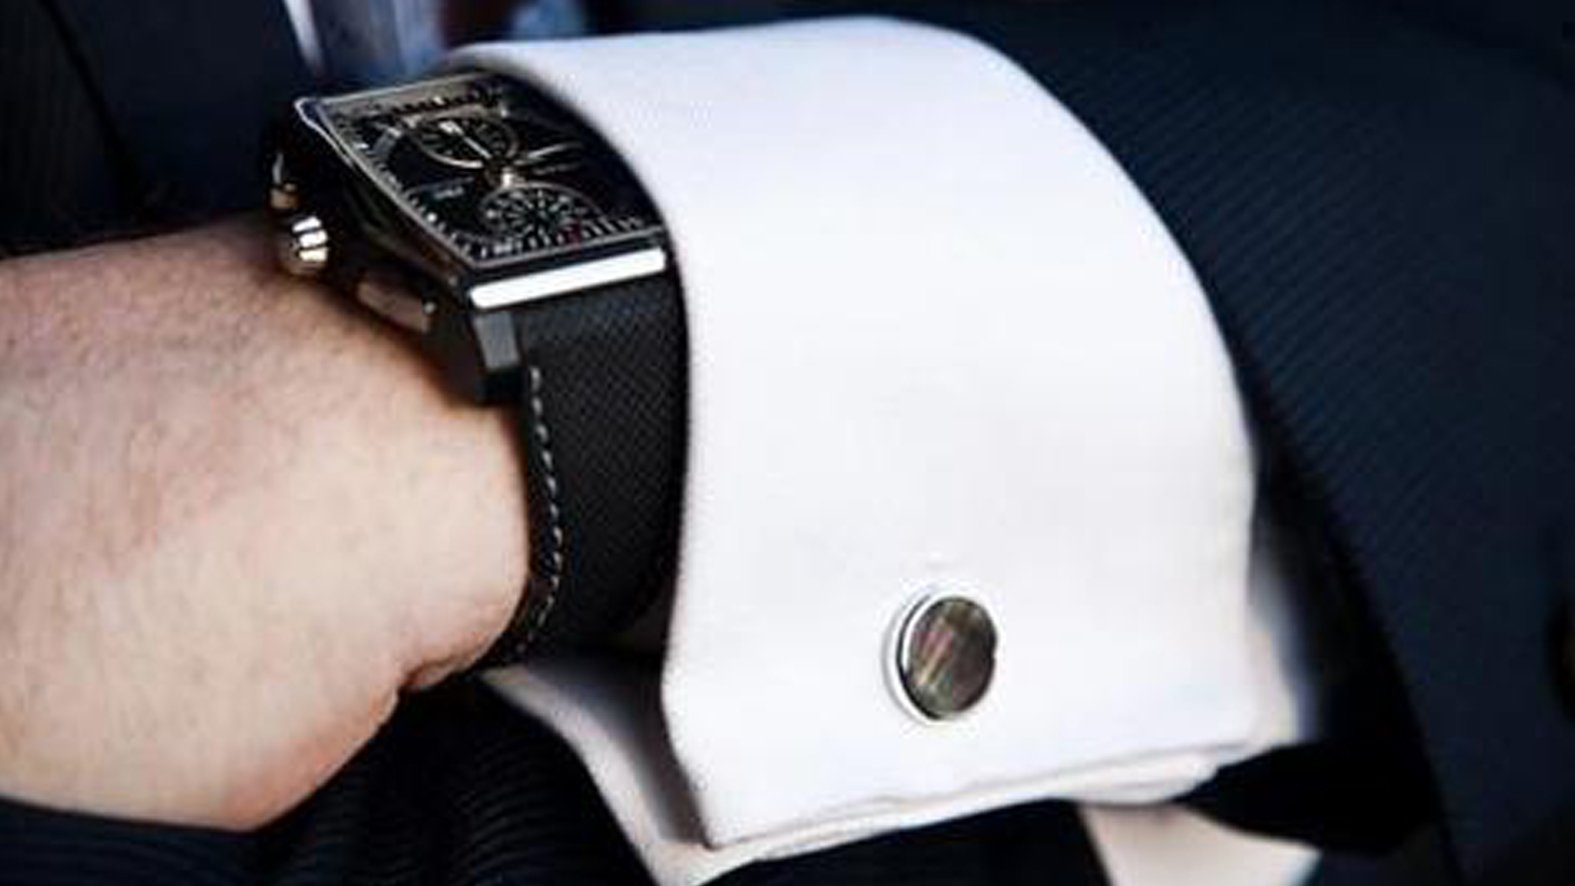 Wristwatch - What is a French Cuff?